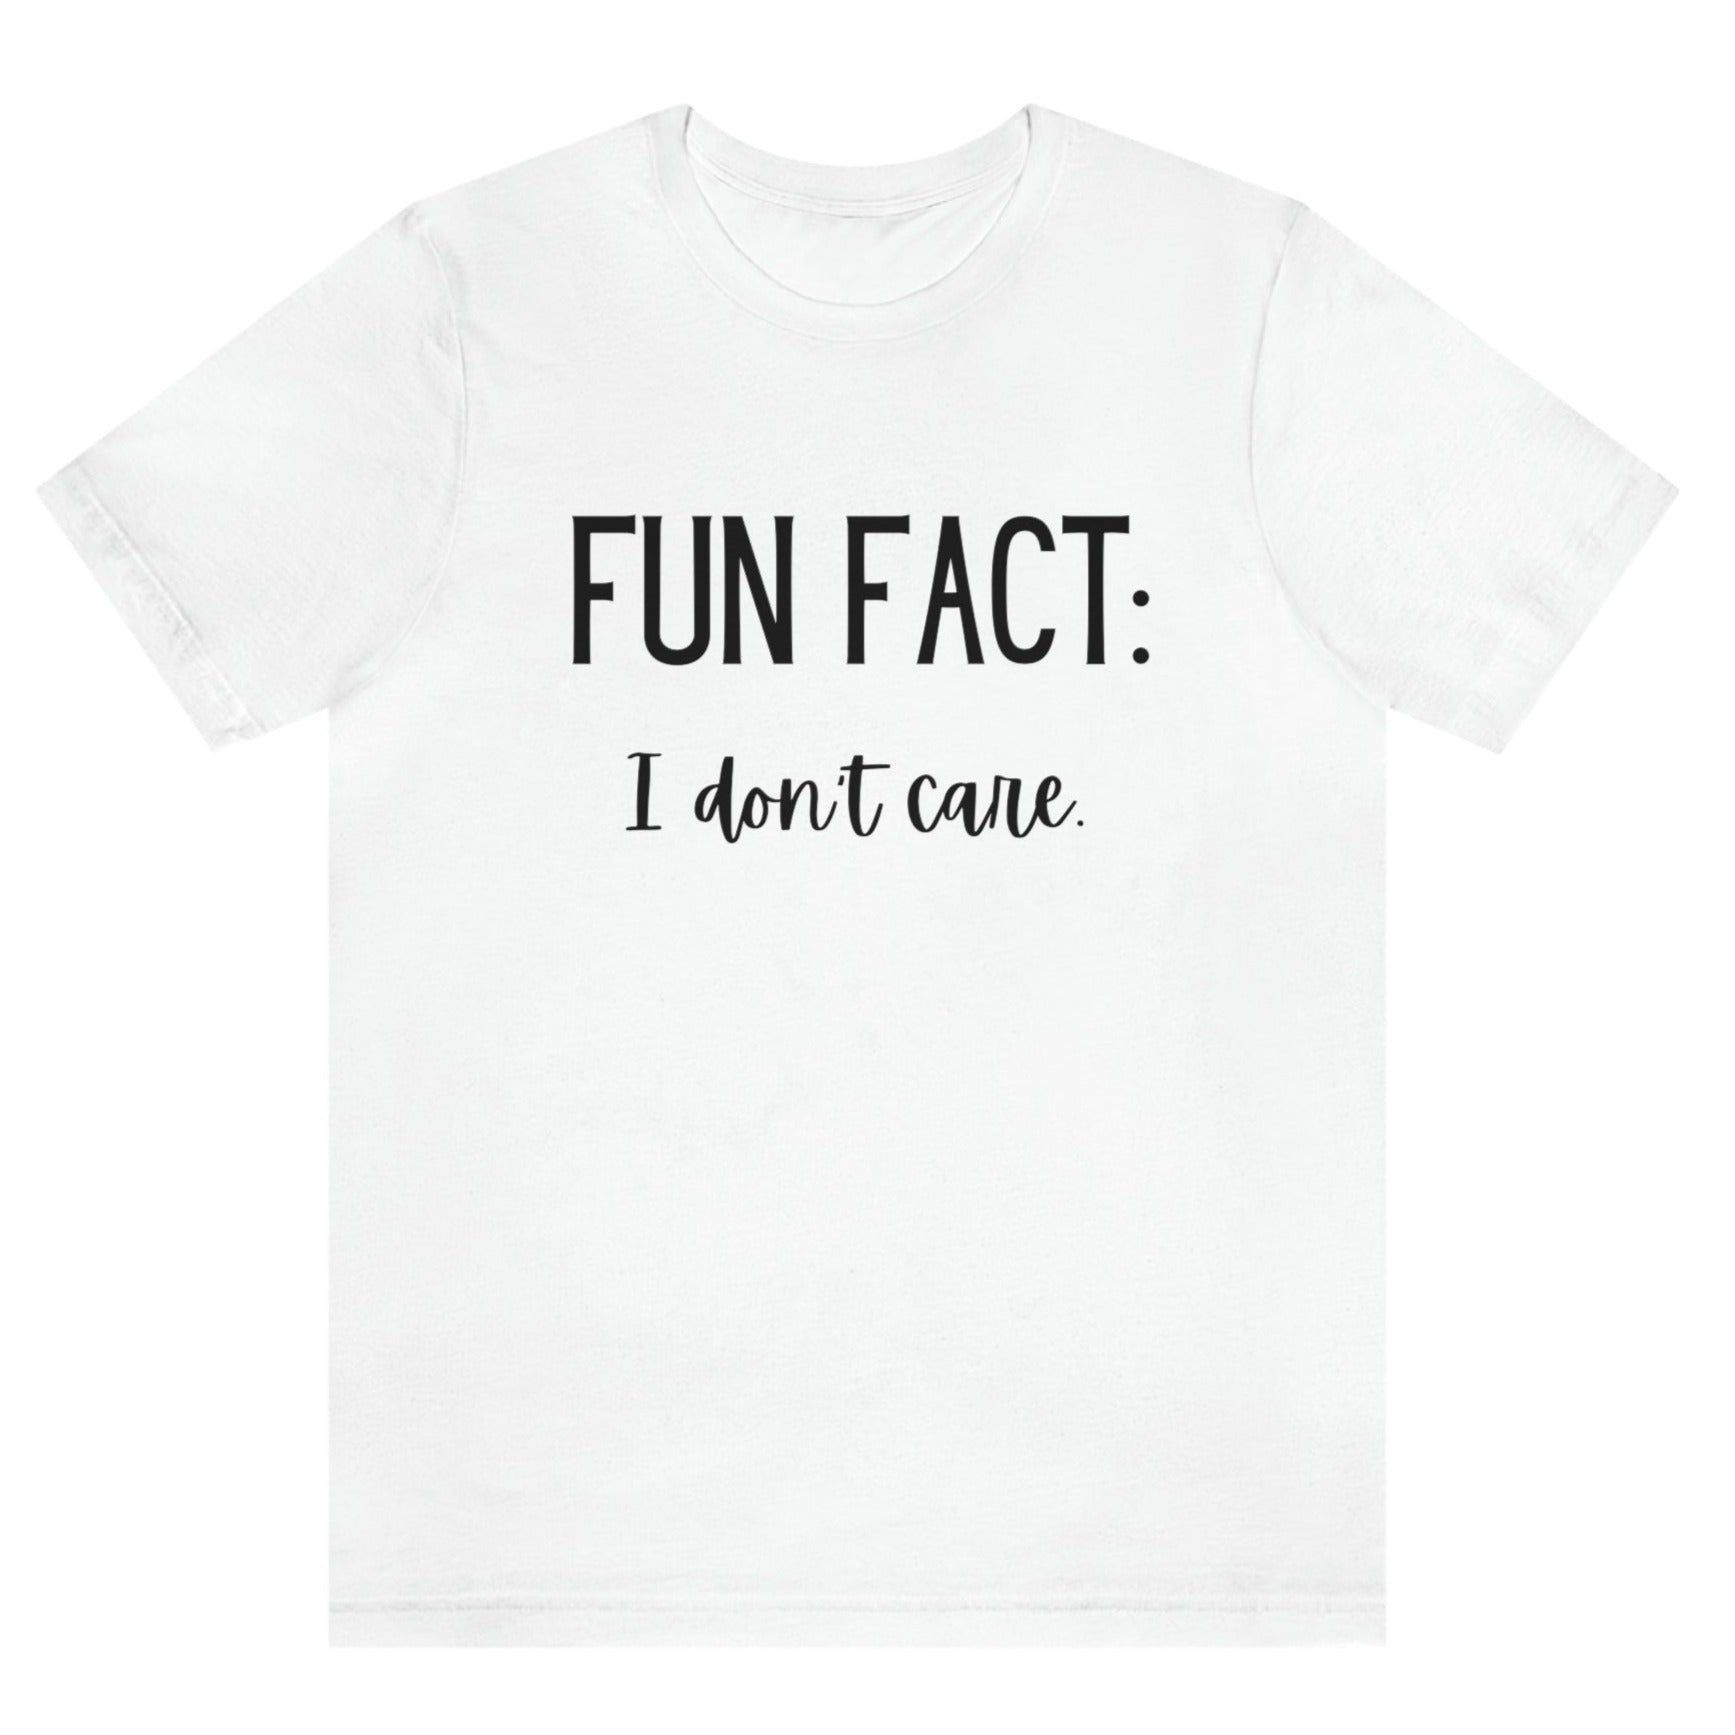 fun-fact-i-dont-care-funny-white-t-shirt-womens-sarcastic